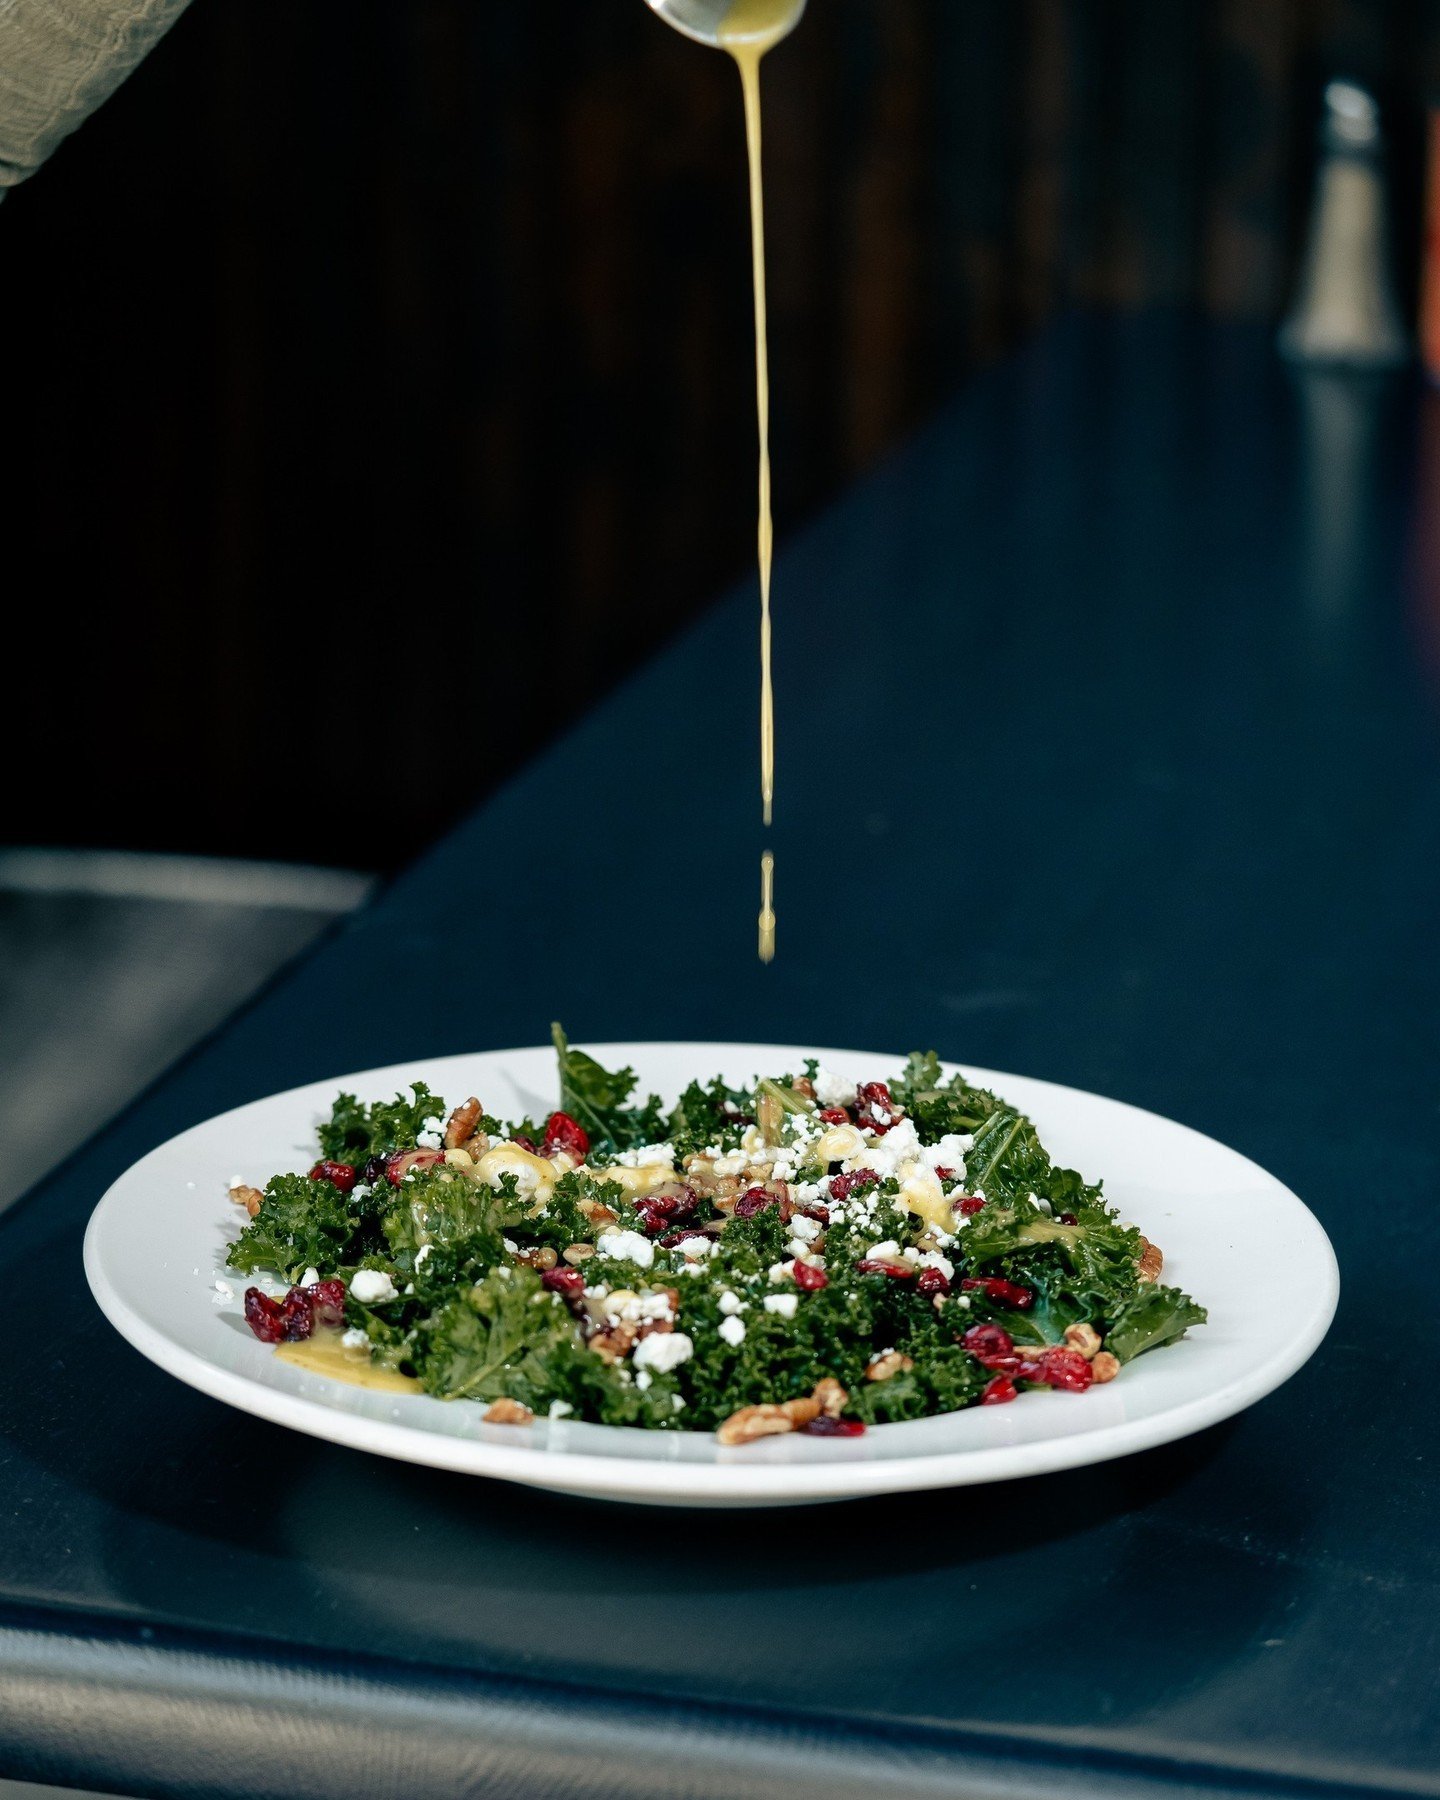 Crunch, crunch, kale for lunch! 🥗💚 Dive into our Kale Salad for lunch today! Crispy kale, pecans, goat cheese, crasins, and our house vinaigrette. 

#thealbertatl #thealbert #atleats #atlantafoodie #inmanparkatl